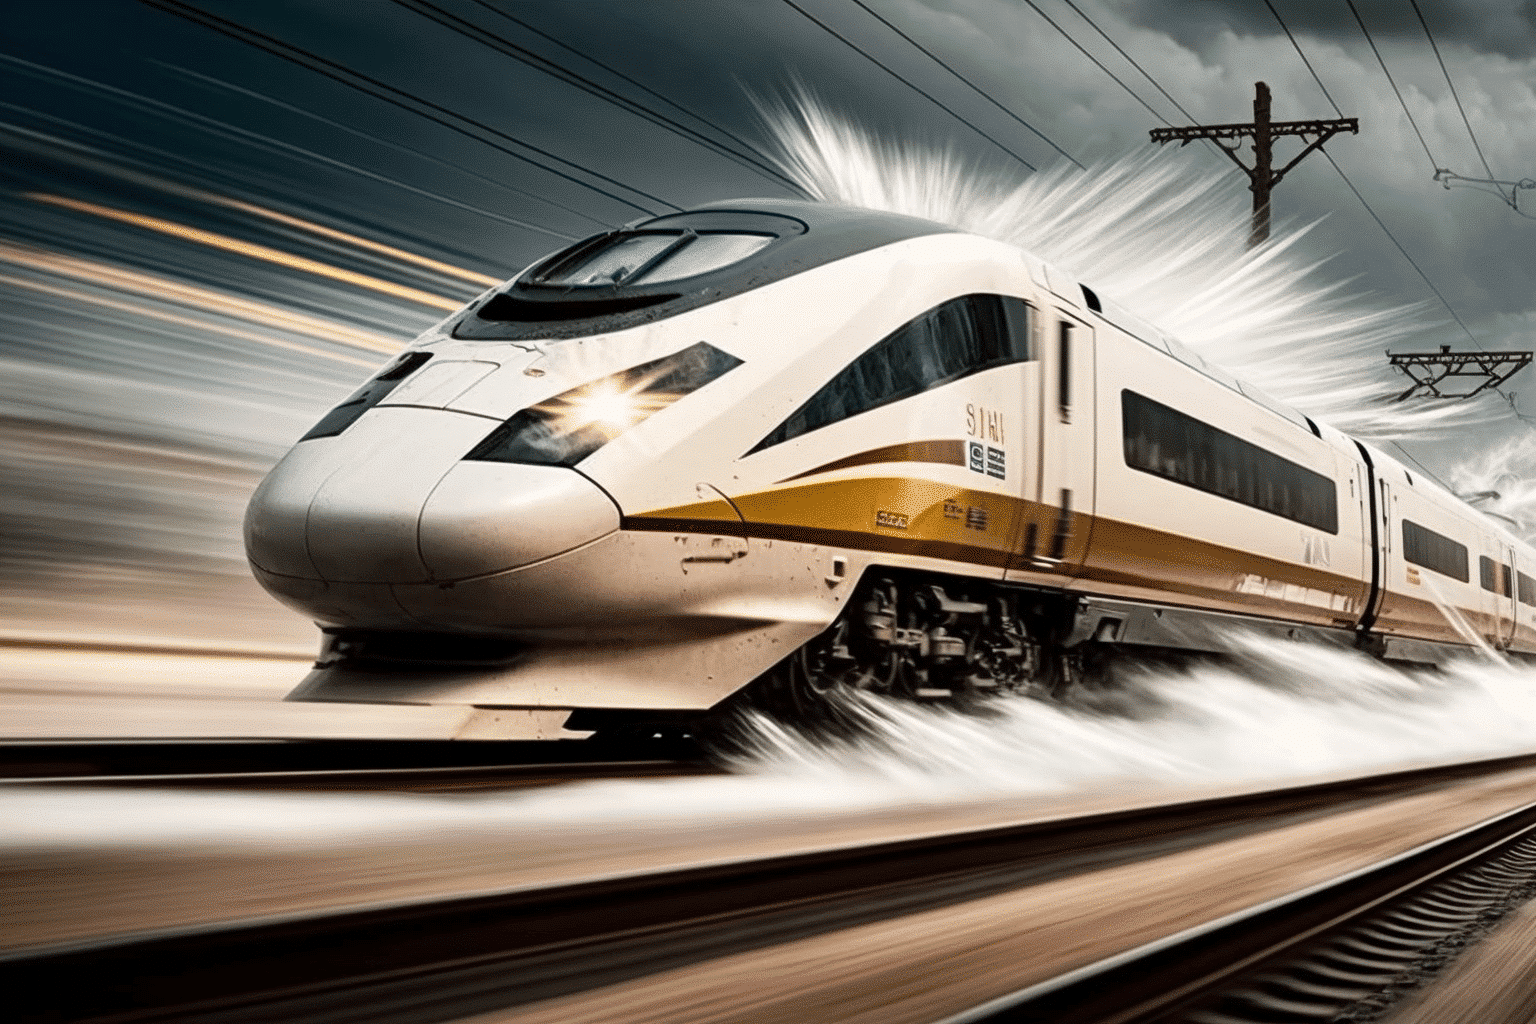 california's-high-speed-rail-project-a-costly-pipe-dream-or-a-missed-opportunity?